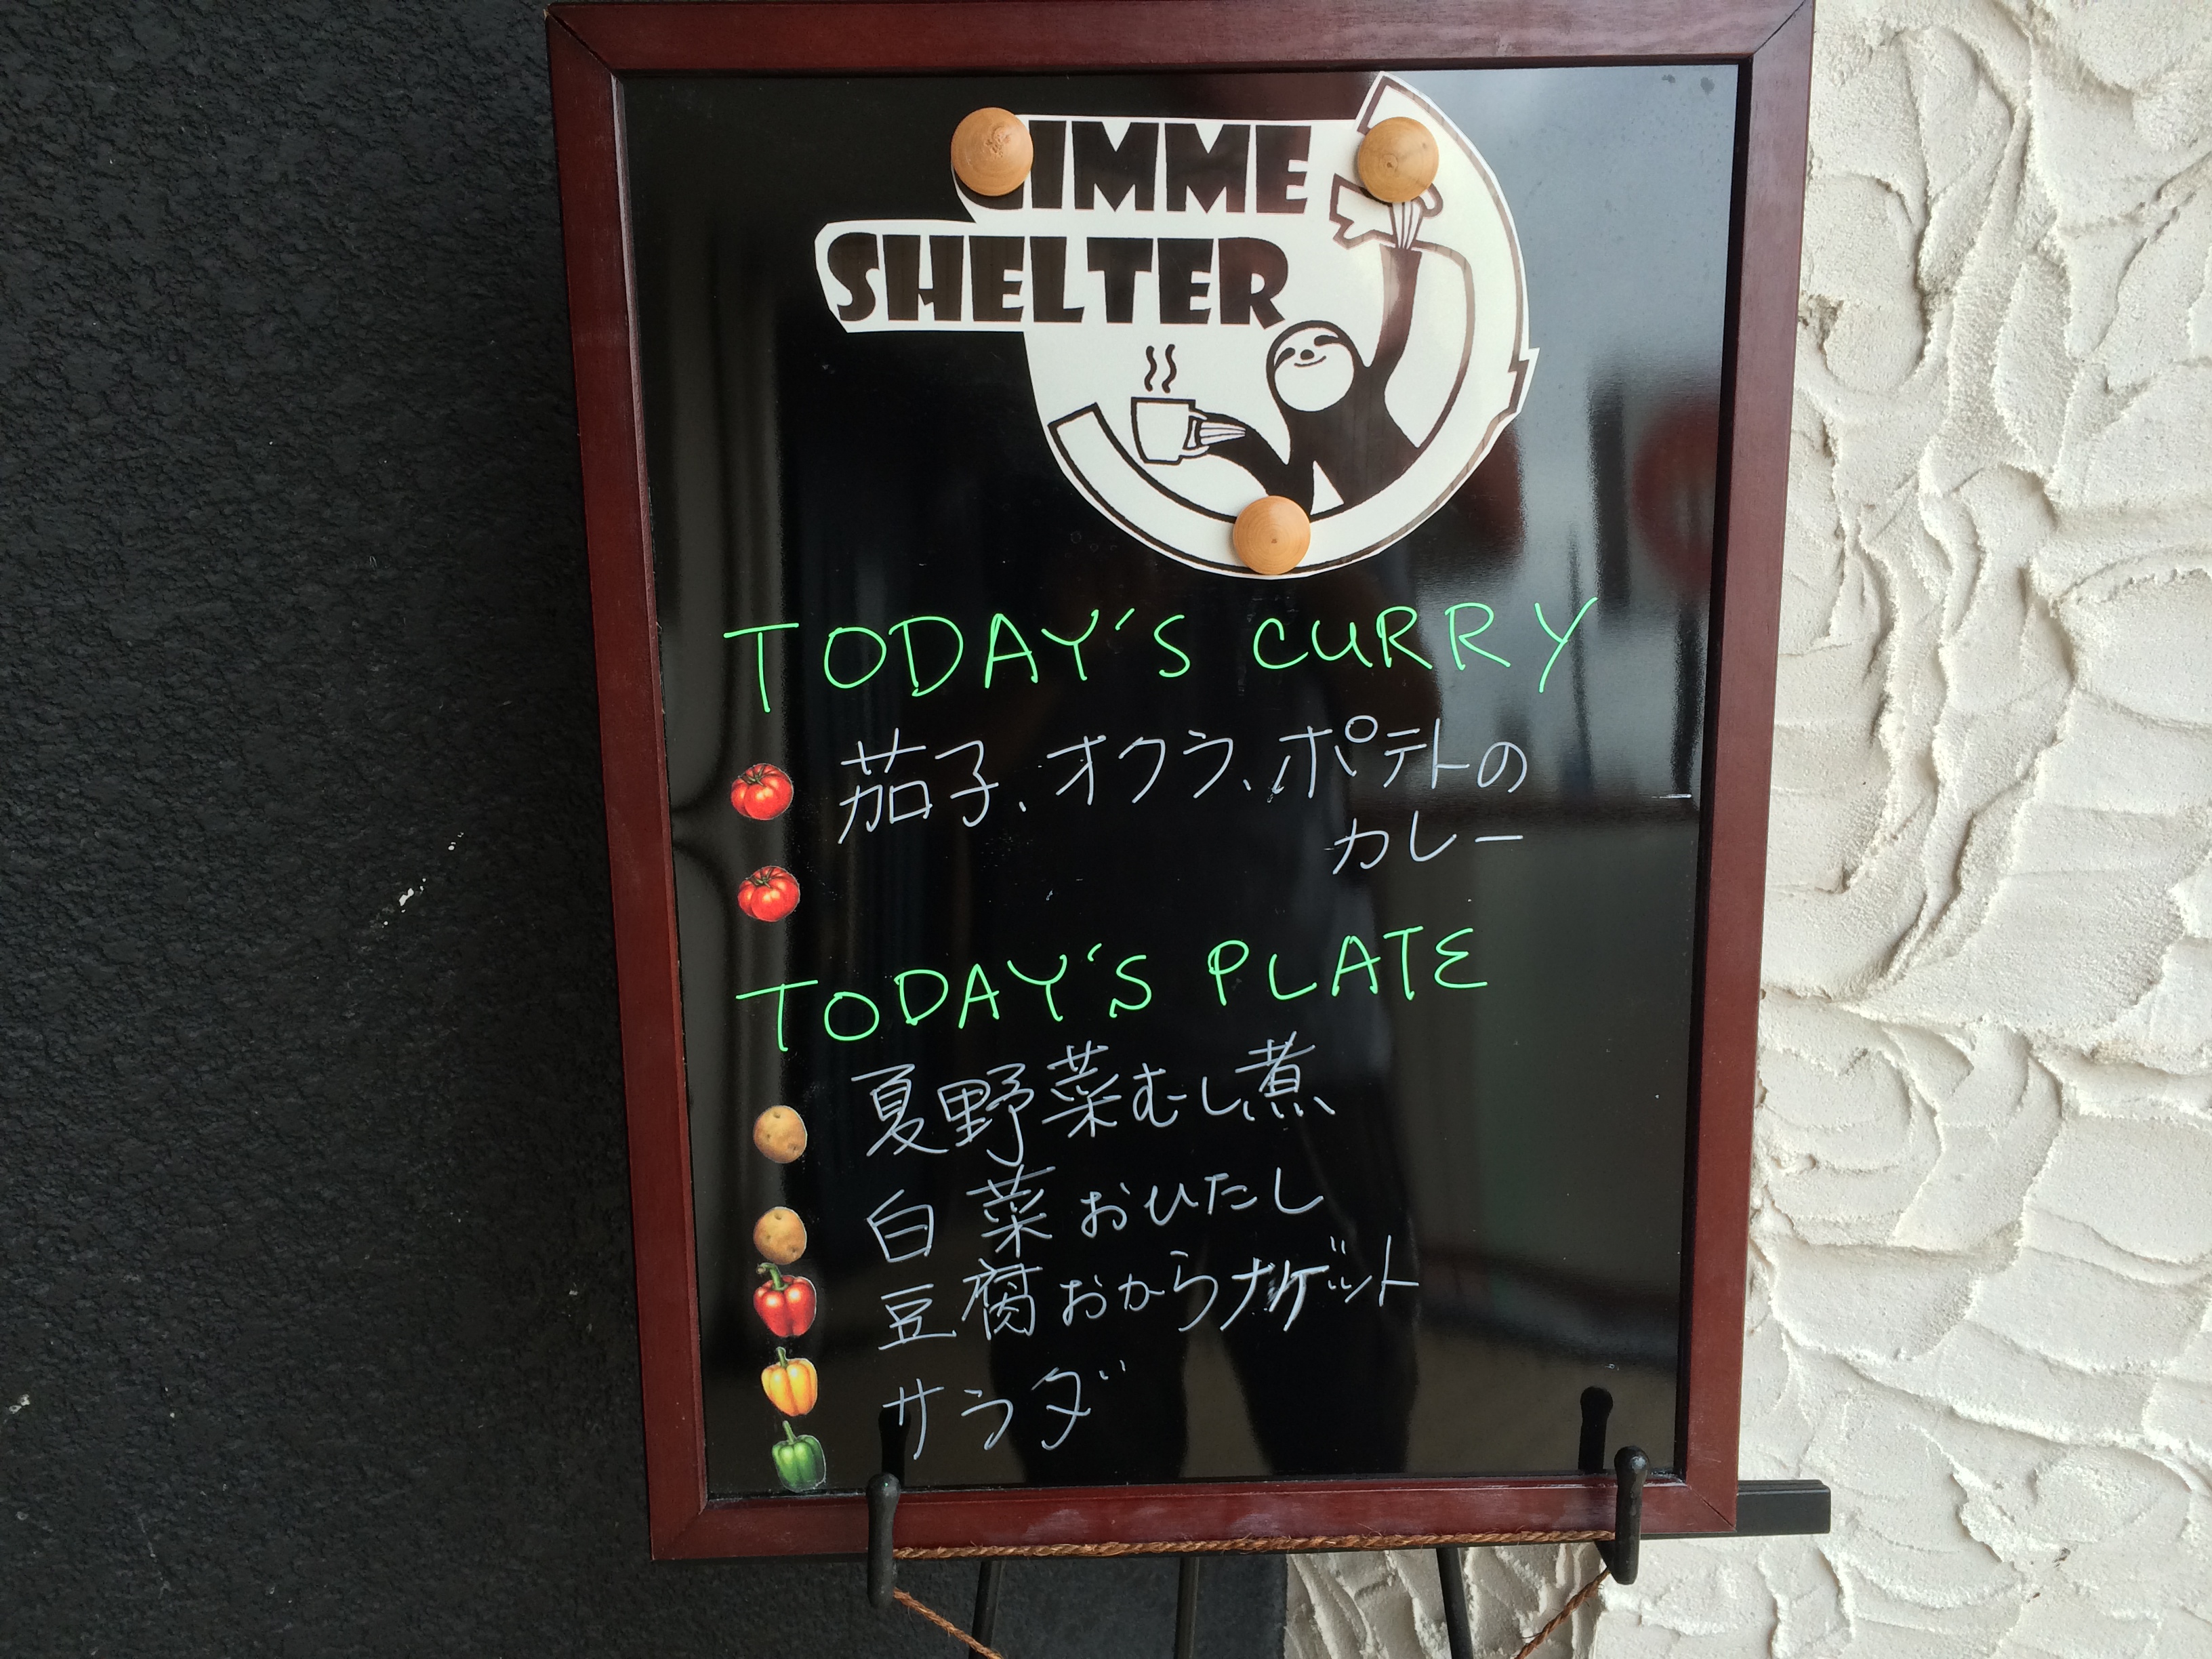 GIMME SHELTER看板